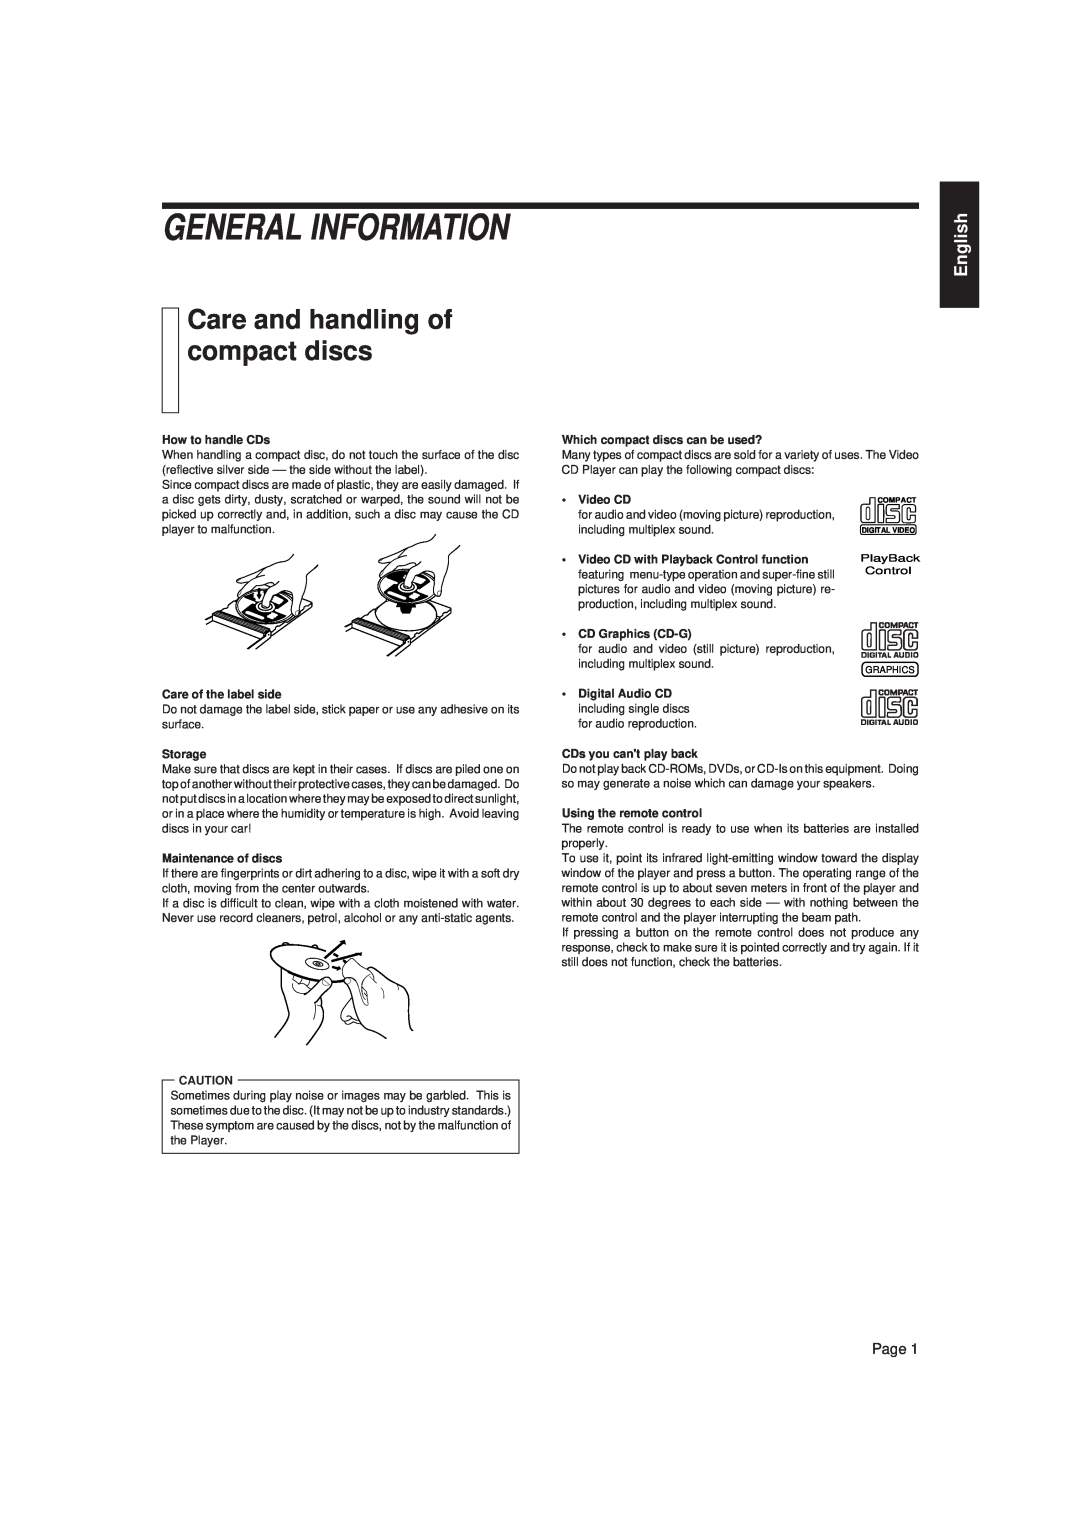 JVC XL-FV323TN manual General Information, Care and handling of compact discs, English, Page 